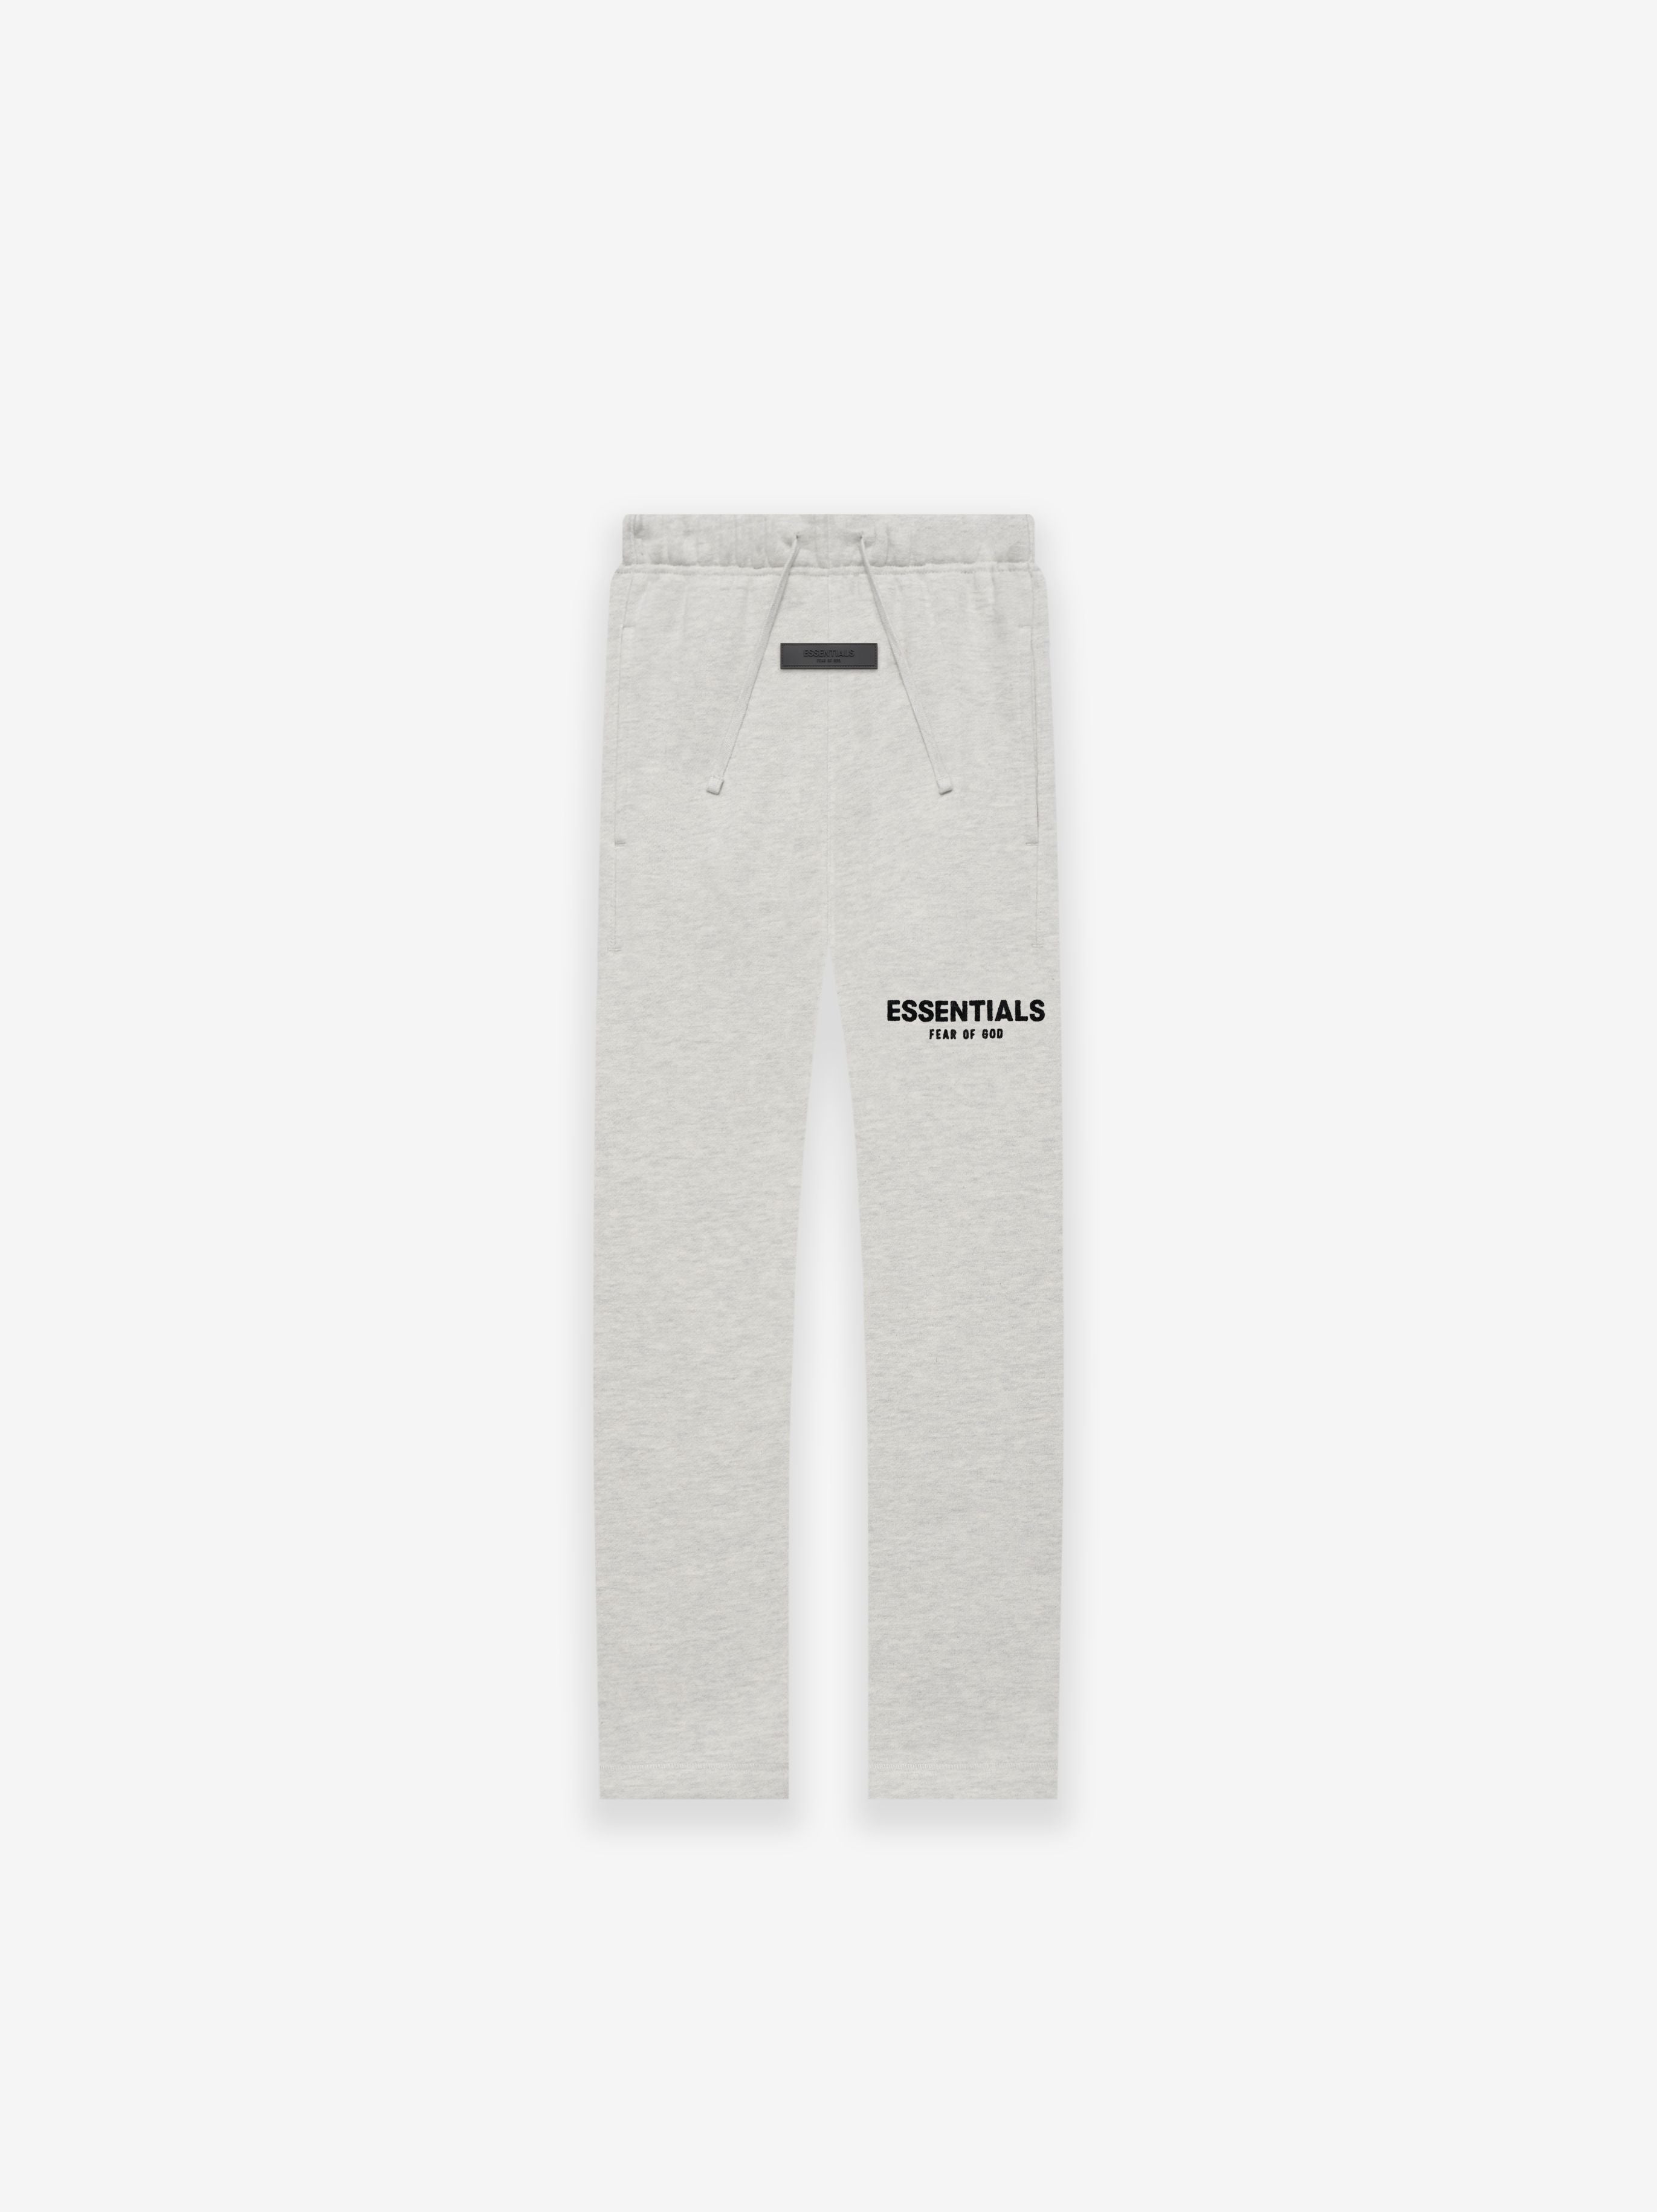 RELAXED SWEATPANTS in LIGHT OATMEAL | Fear of God